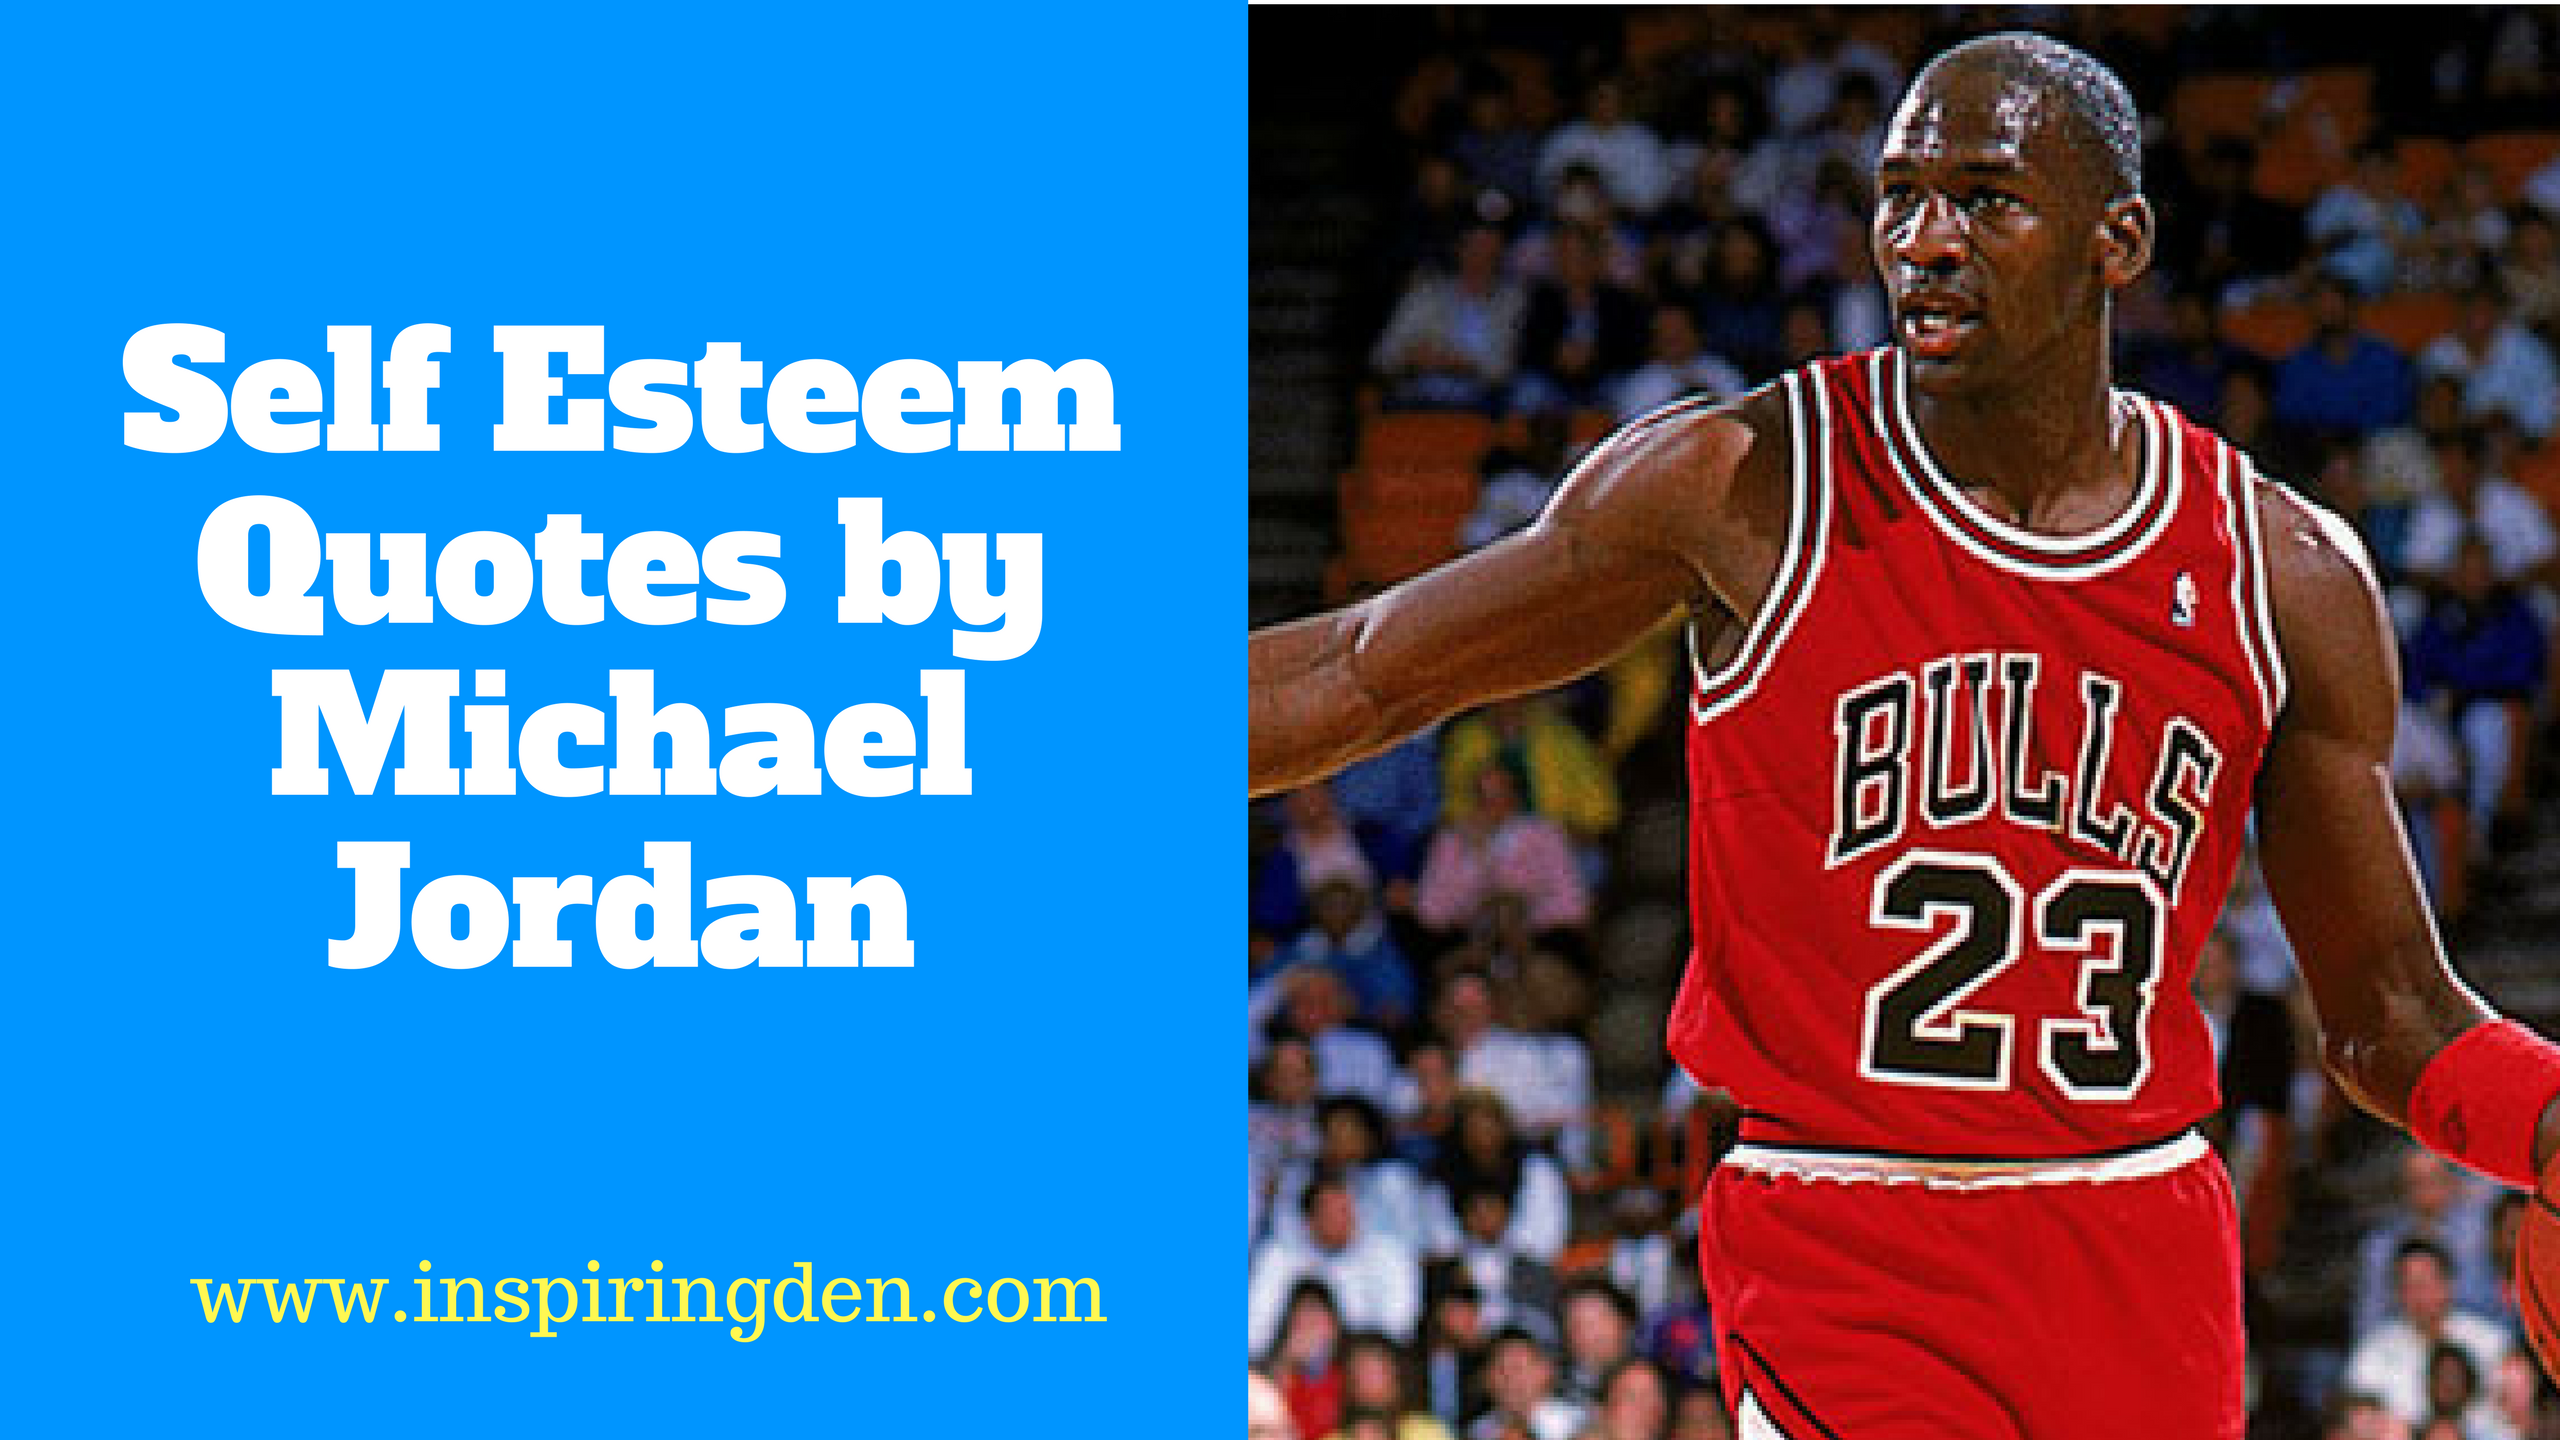 Quotes By Michael Jordan - Madame Tussauds , HD Wallpaper & Backgrounds